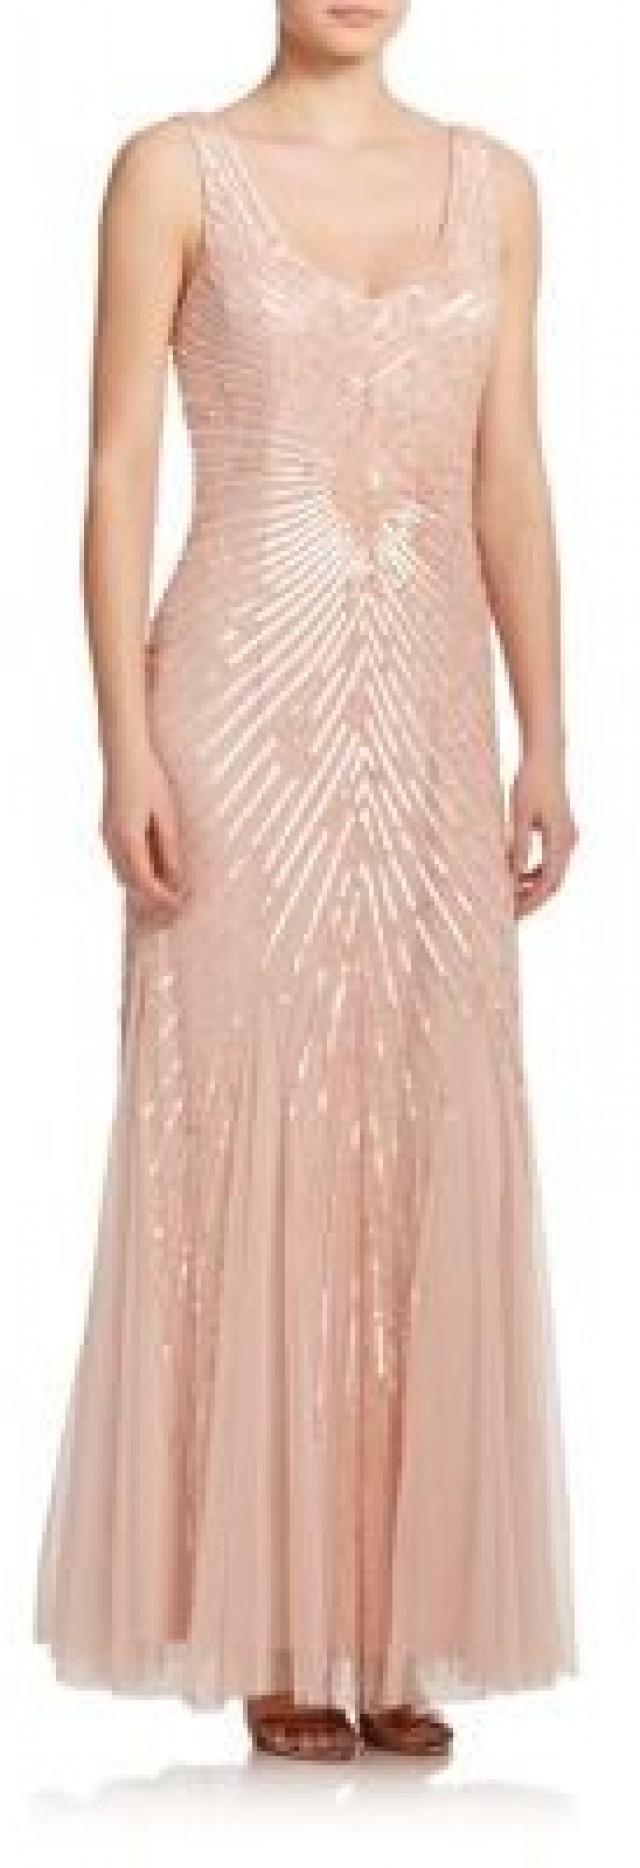 Sequined Godet Bridesmaid Gown